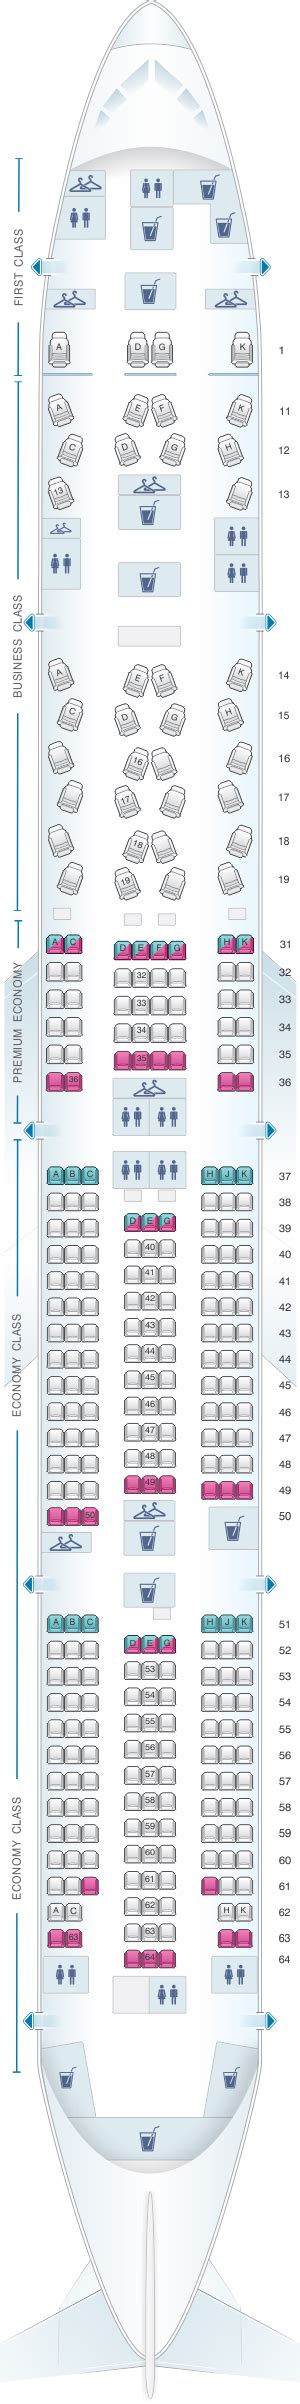 Seat Map China Southern Airlines Boeing B77w Seatmaestro